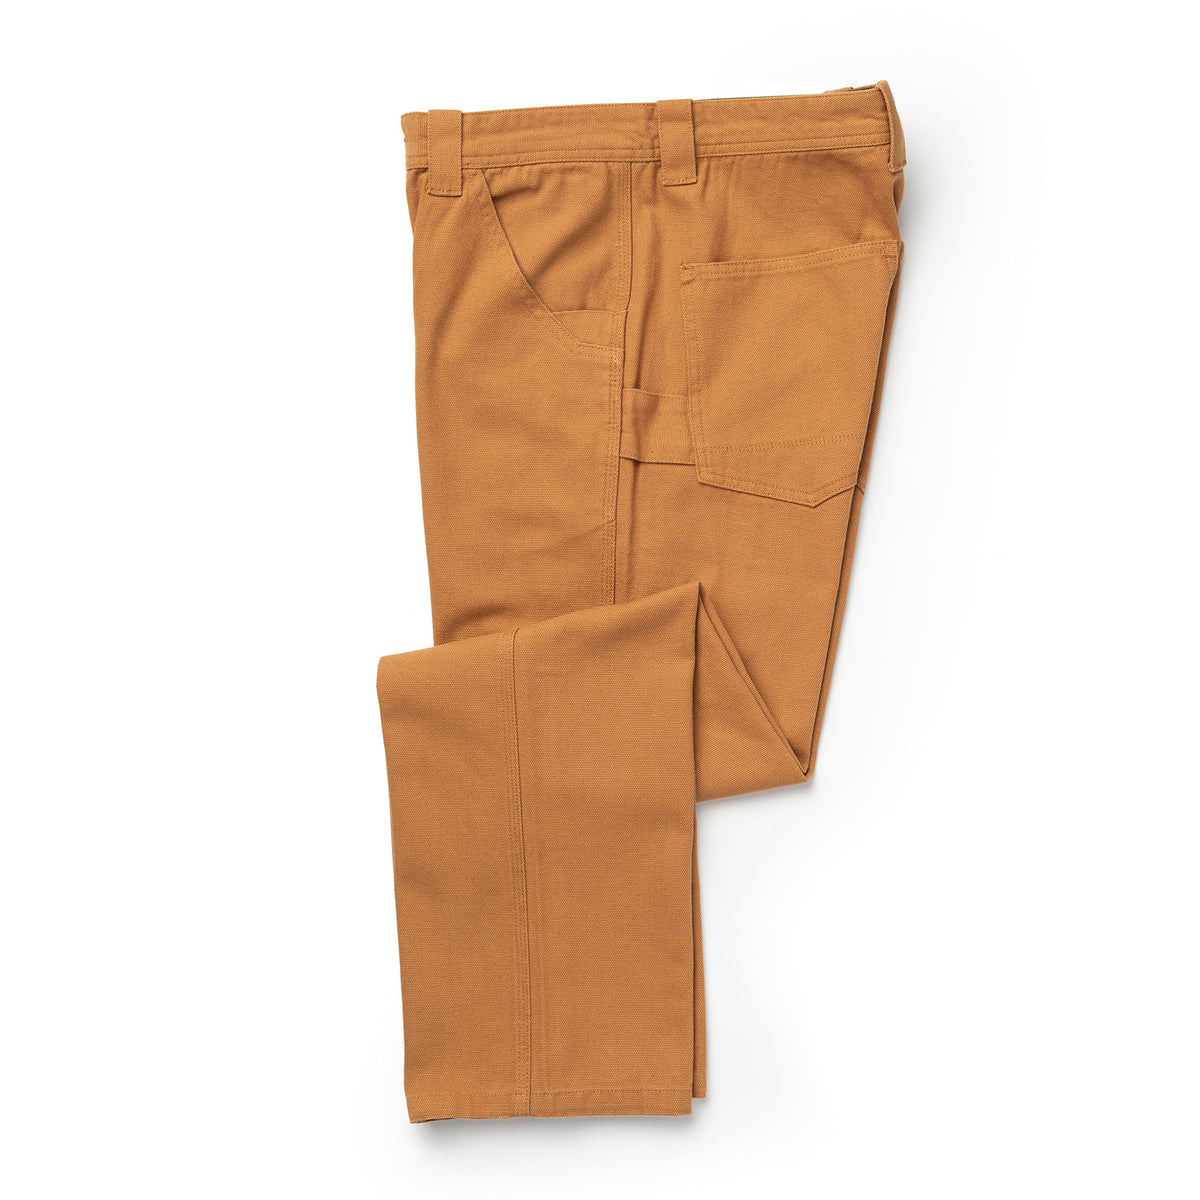 Bison Canvas Pant Regular Fit Coyote Brown | Seager Co.